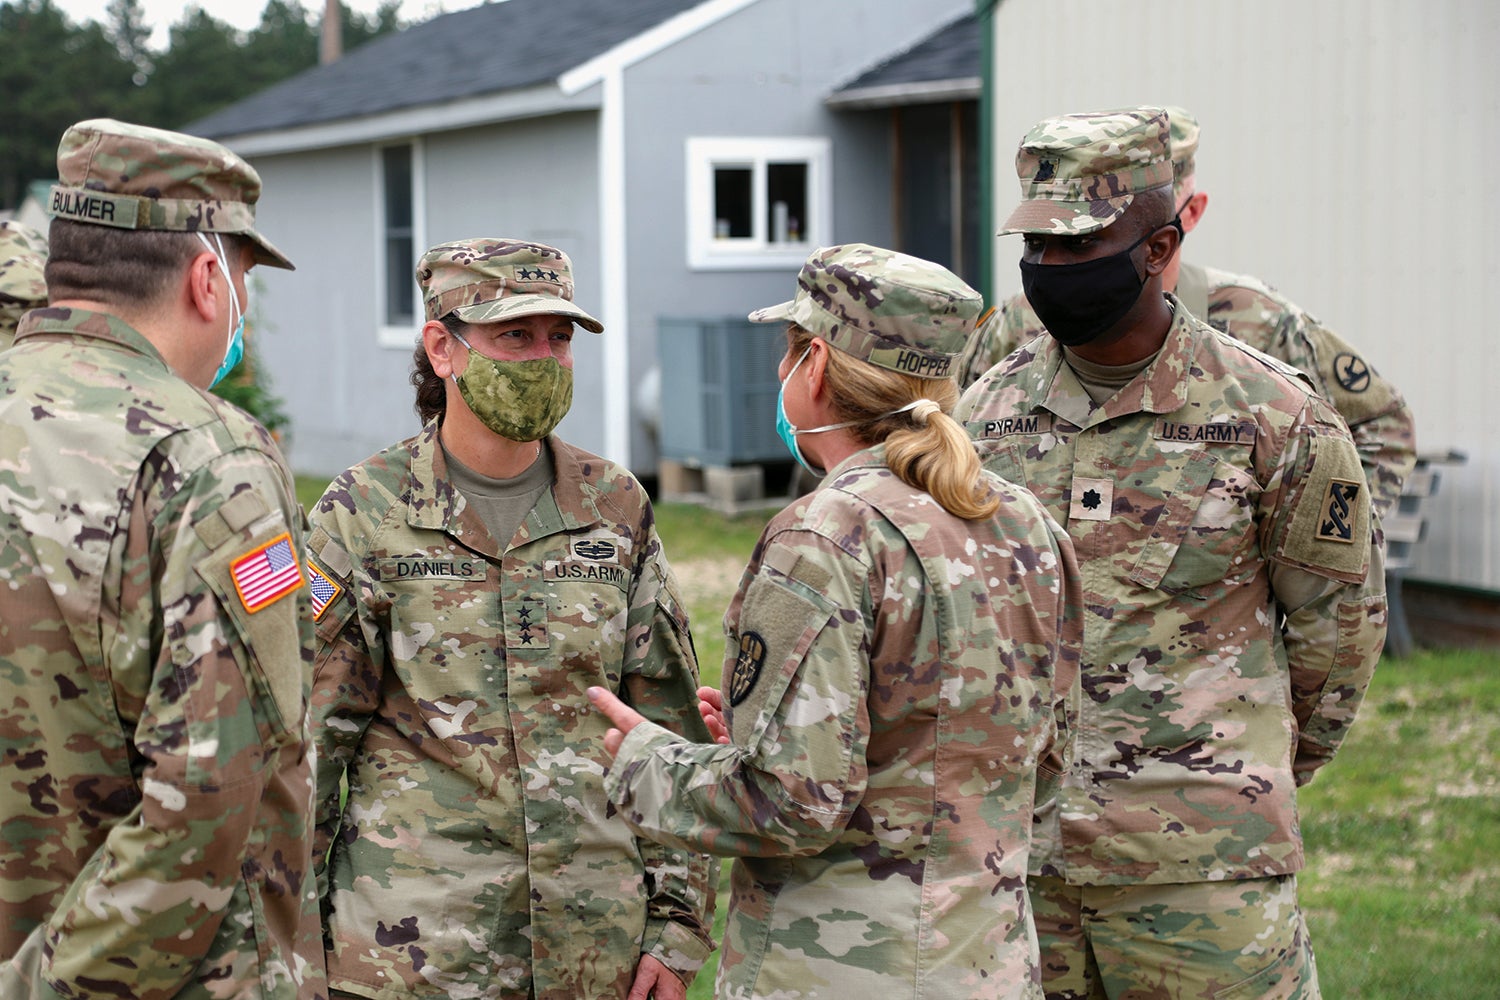 Daniels, second from left, meets with soldiers during an exercise at Fort McCoy, Wisconsin. (Credit: U.S. Army/Sgt. 1st Class Gary Witte)